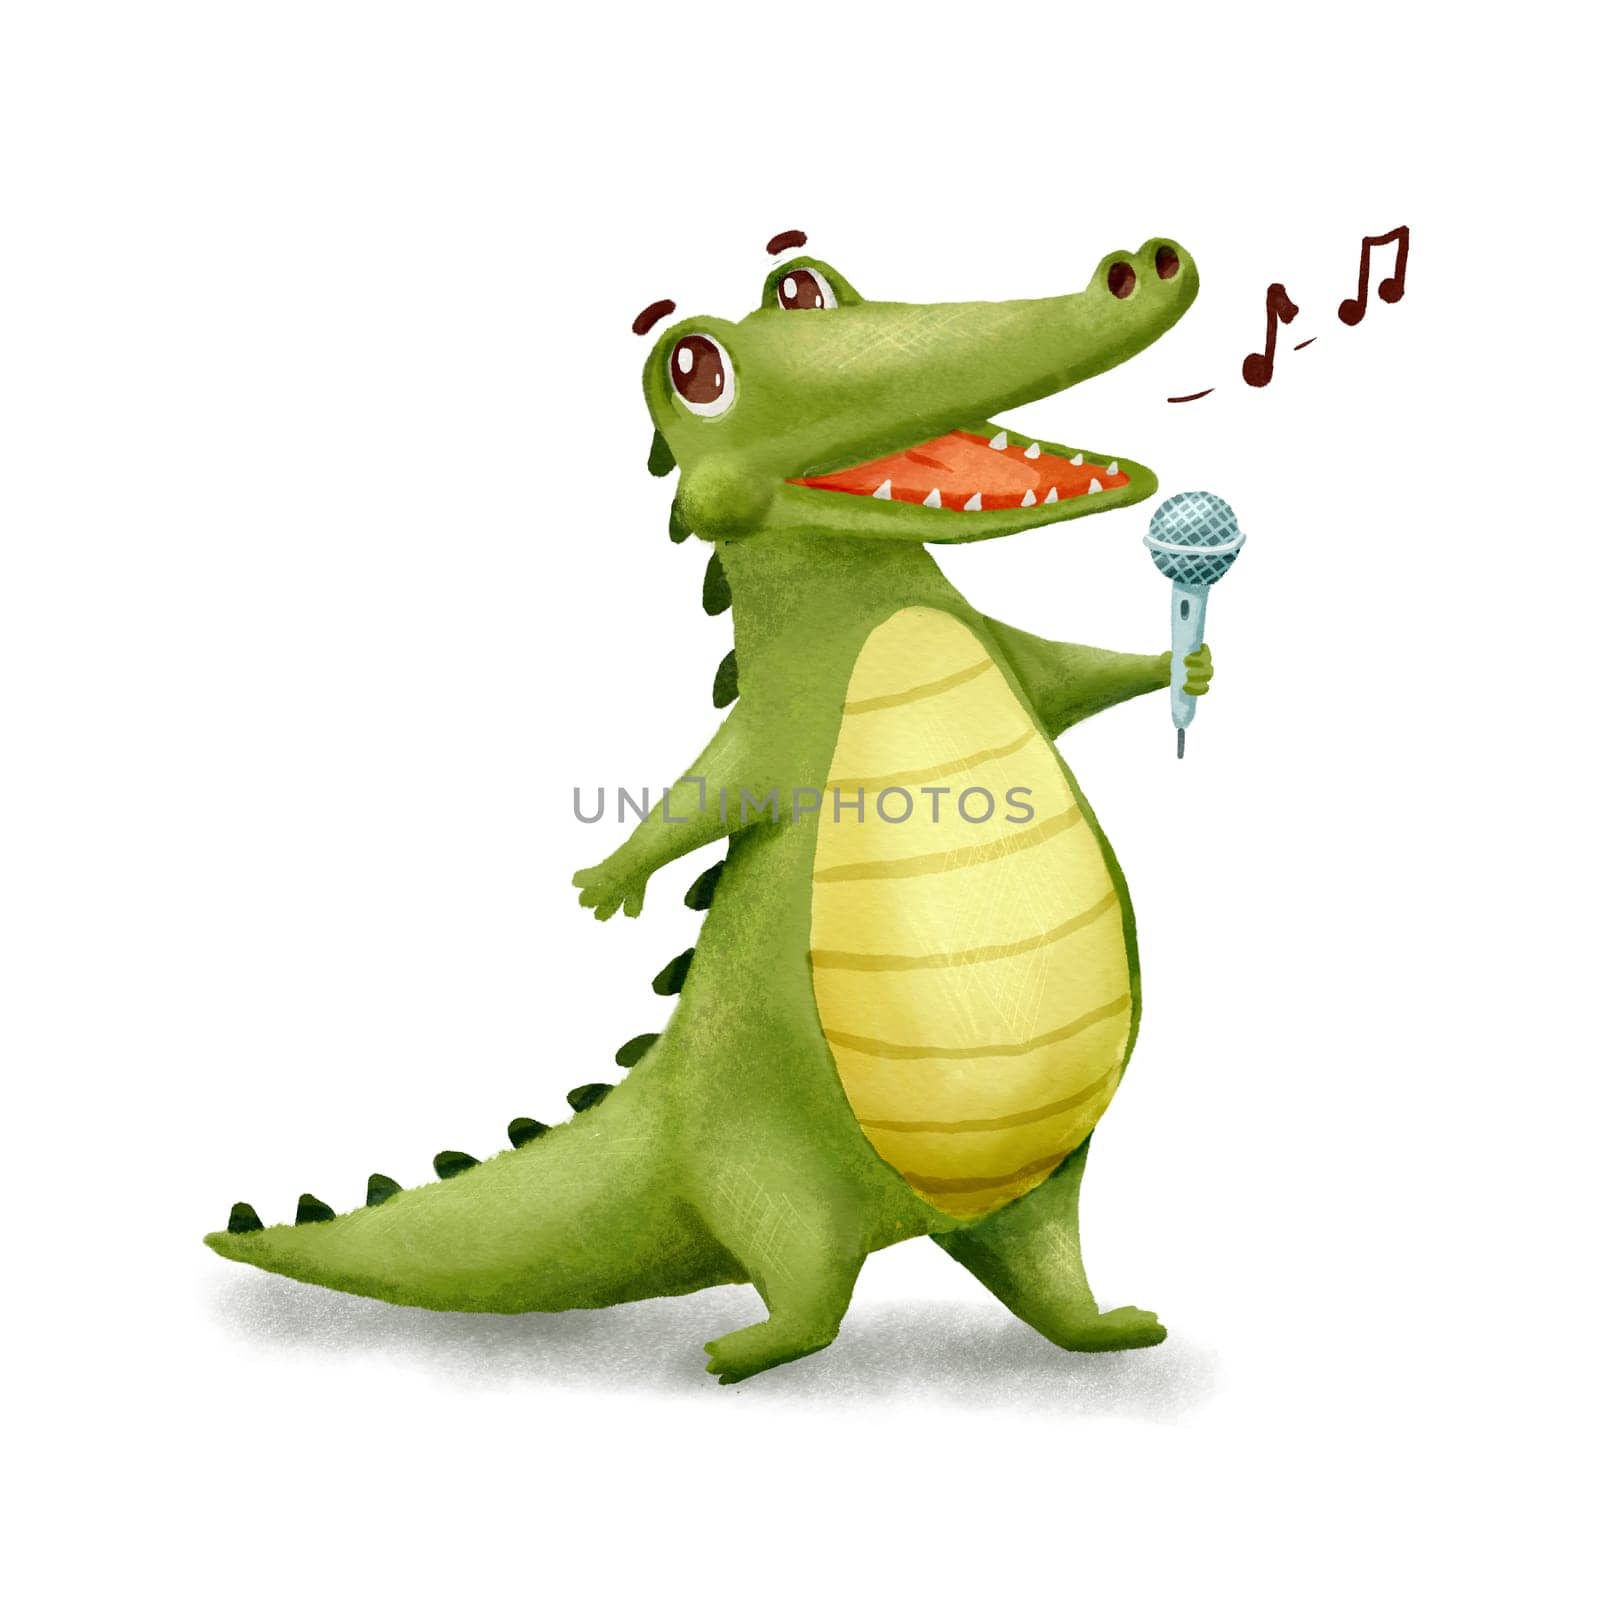 Cute Crocodile is singer. Funny Alligator with microphone isolated on white. Cartoon Illustration Animal Character singing song by ElenaPlatova